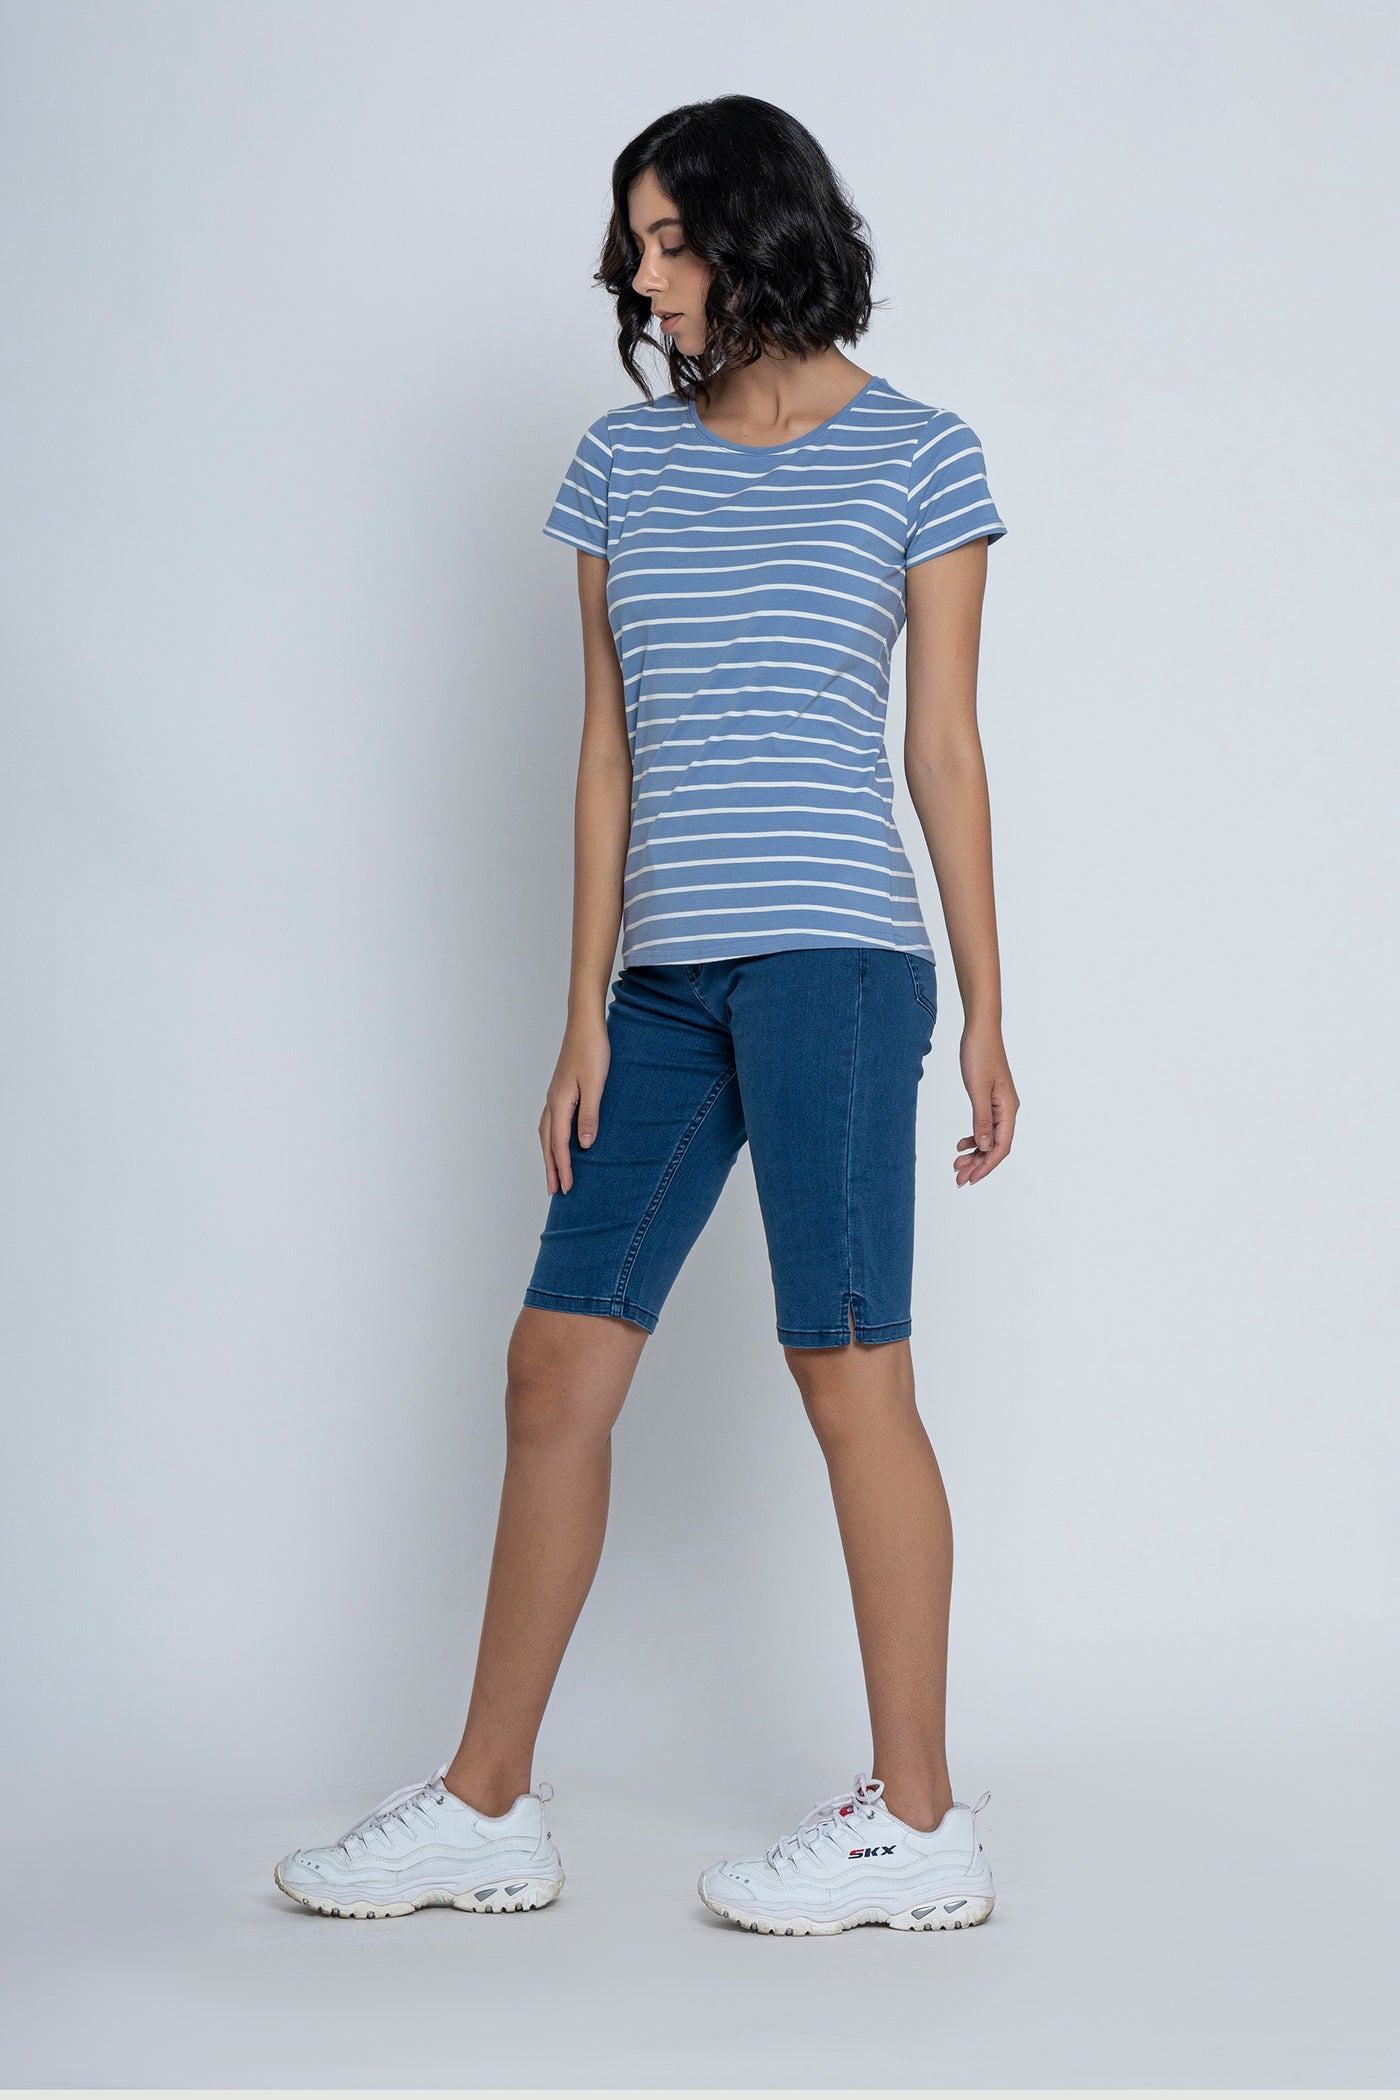 Blue with White Stripes Short Sleeves T-Shirt